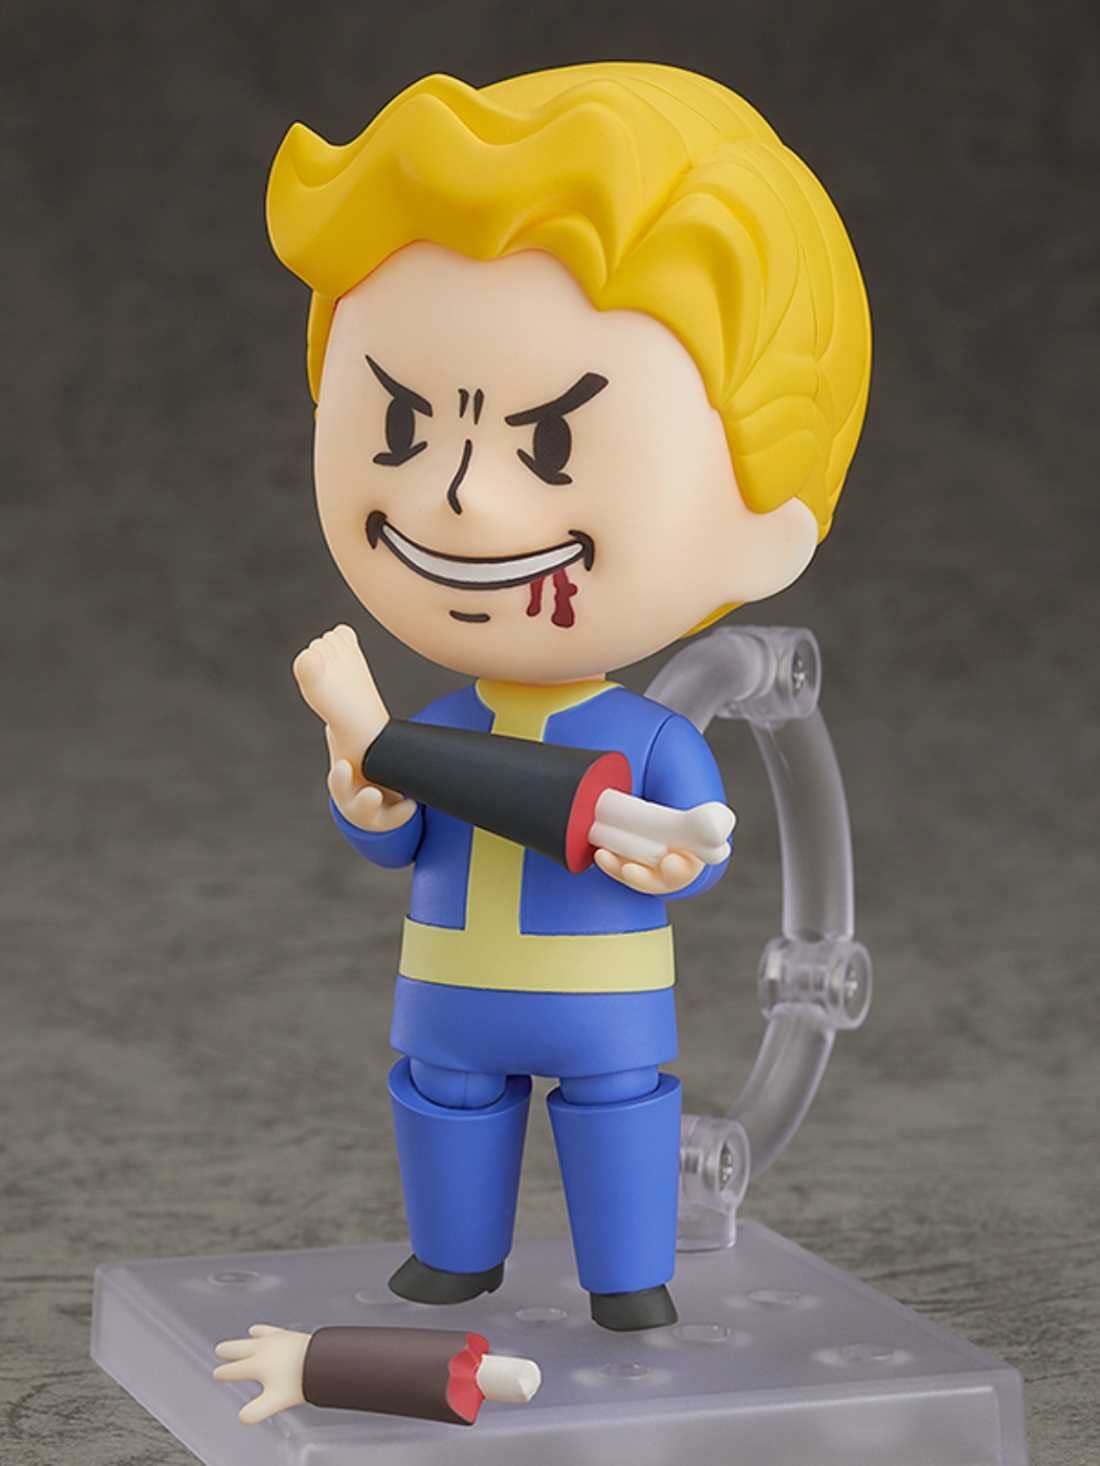 Leave the Vault with New Vault Boy Nendoroid from Good Smile Company